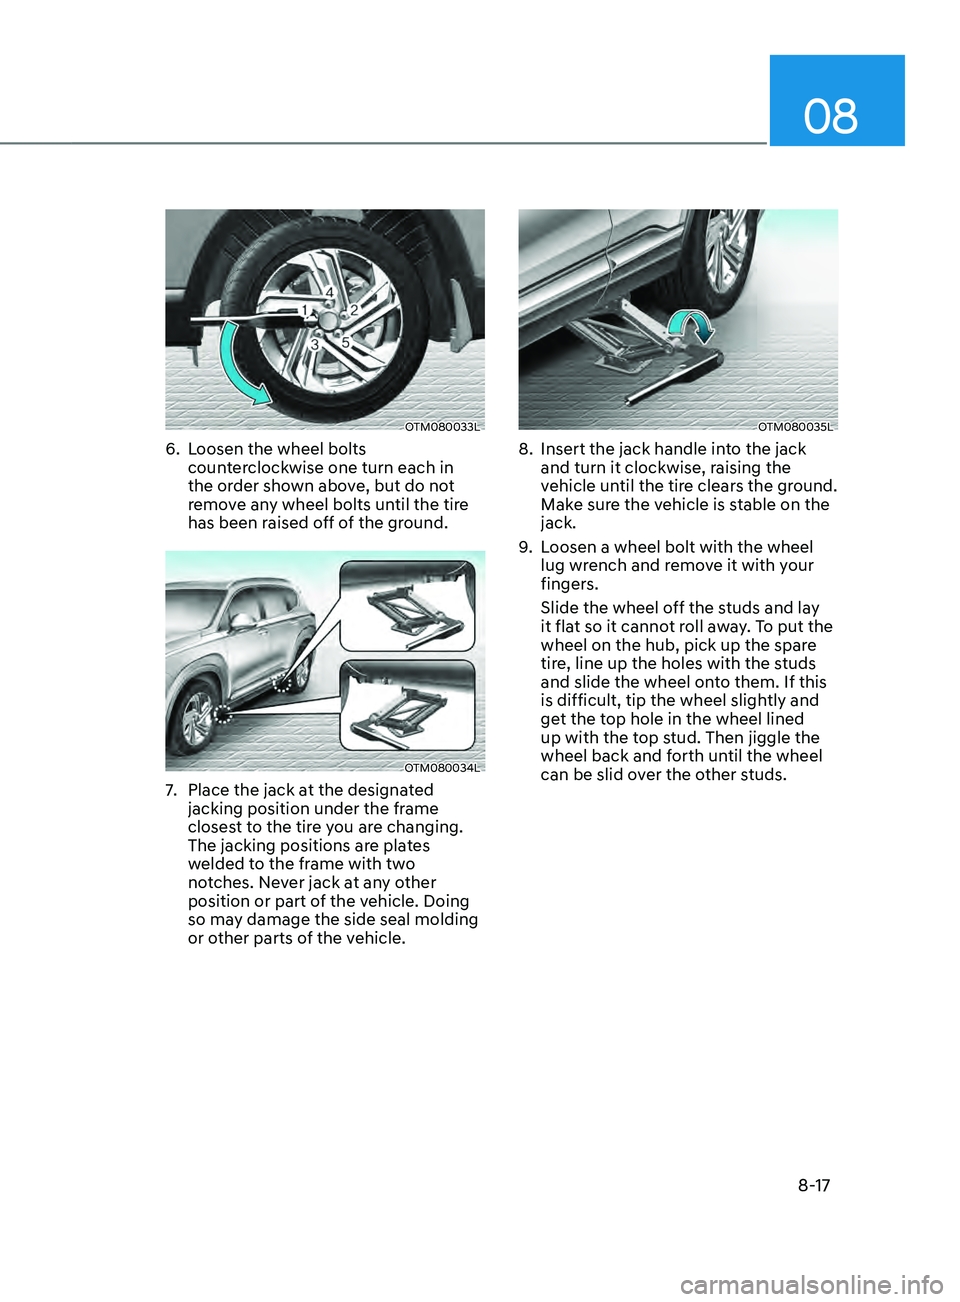 HYUNDAI SANTA FE 2021  Owners Manual 08
8-17
OTM080033L
6. Loosen the wheel bolts 
counterclockwise one turn each in 
the order shown above, but do not 
remove any wheel bolts until the tire 
has been raised off of the ground.
OTM080034L